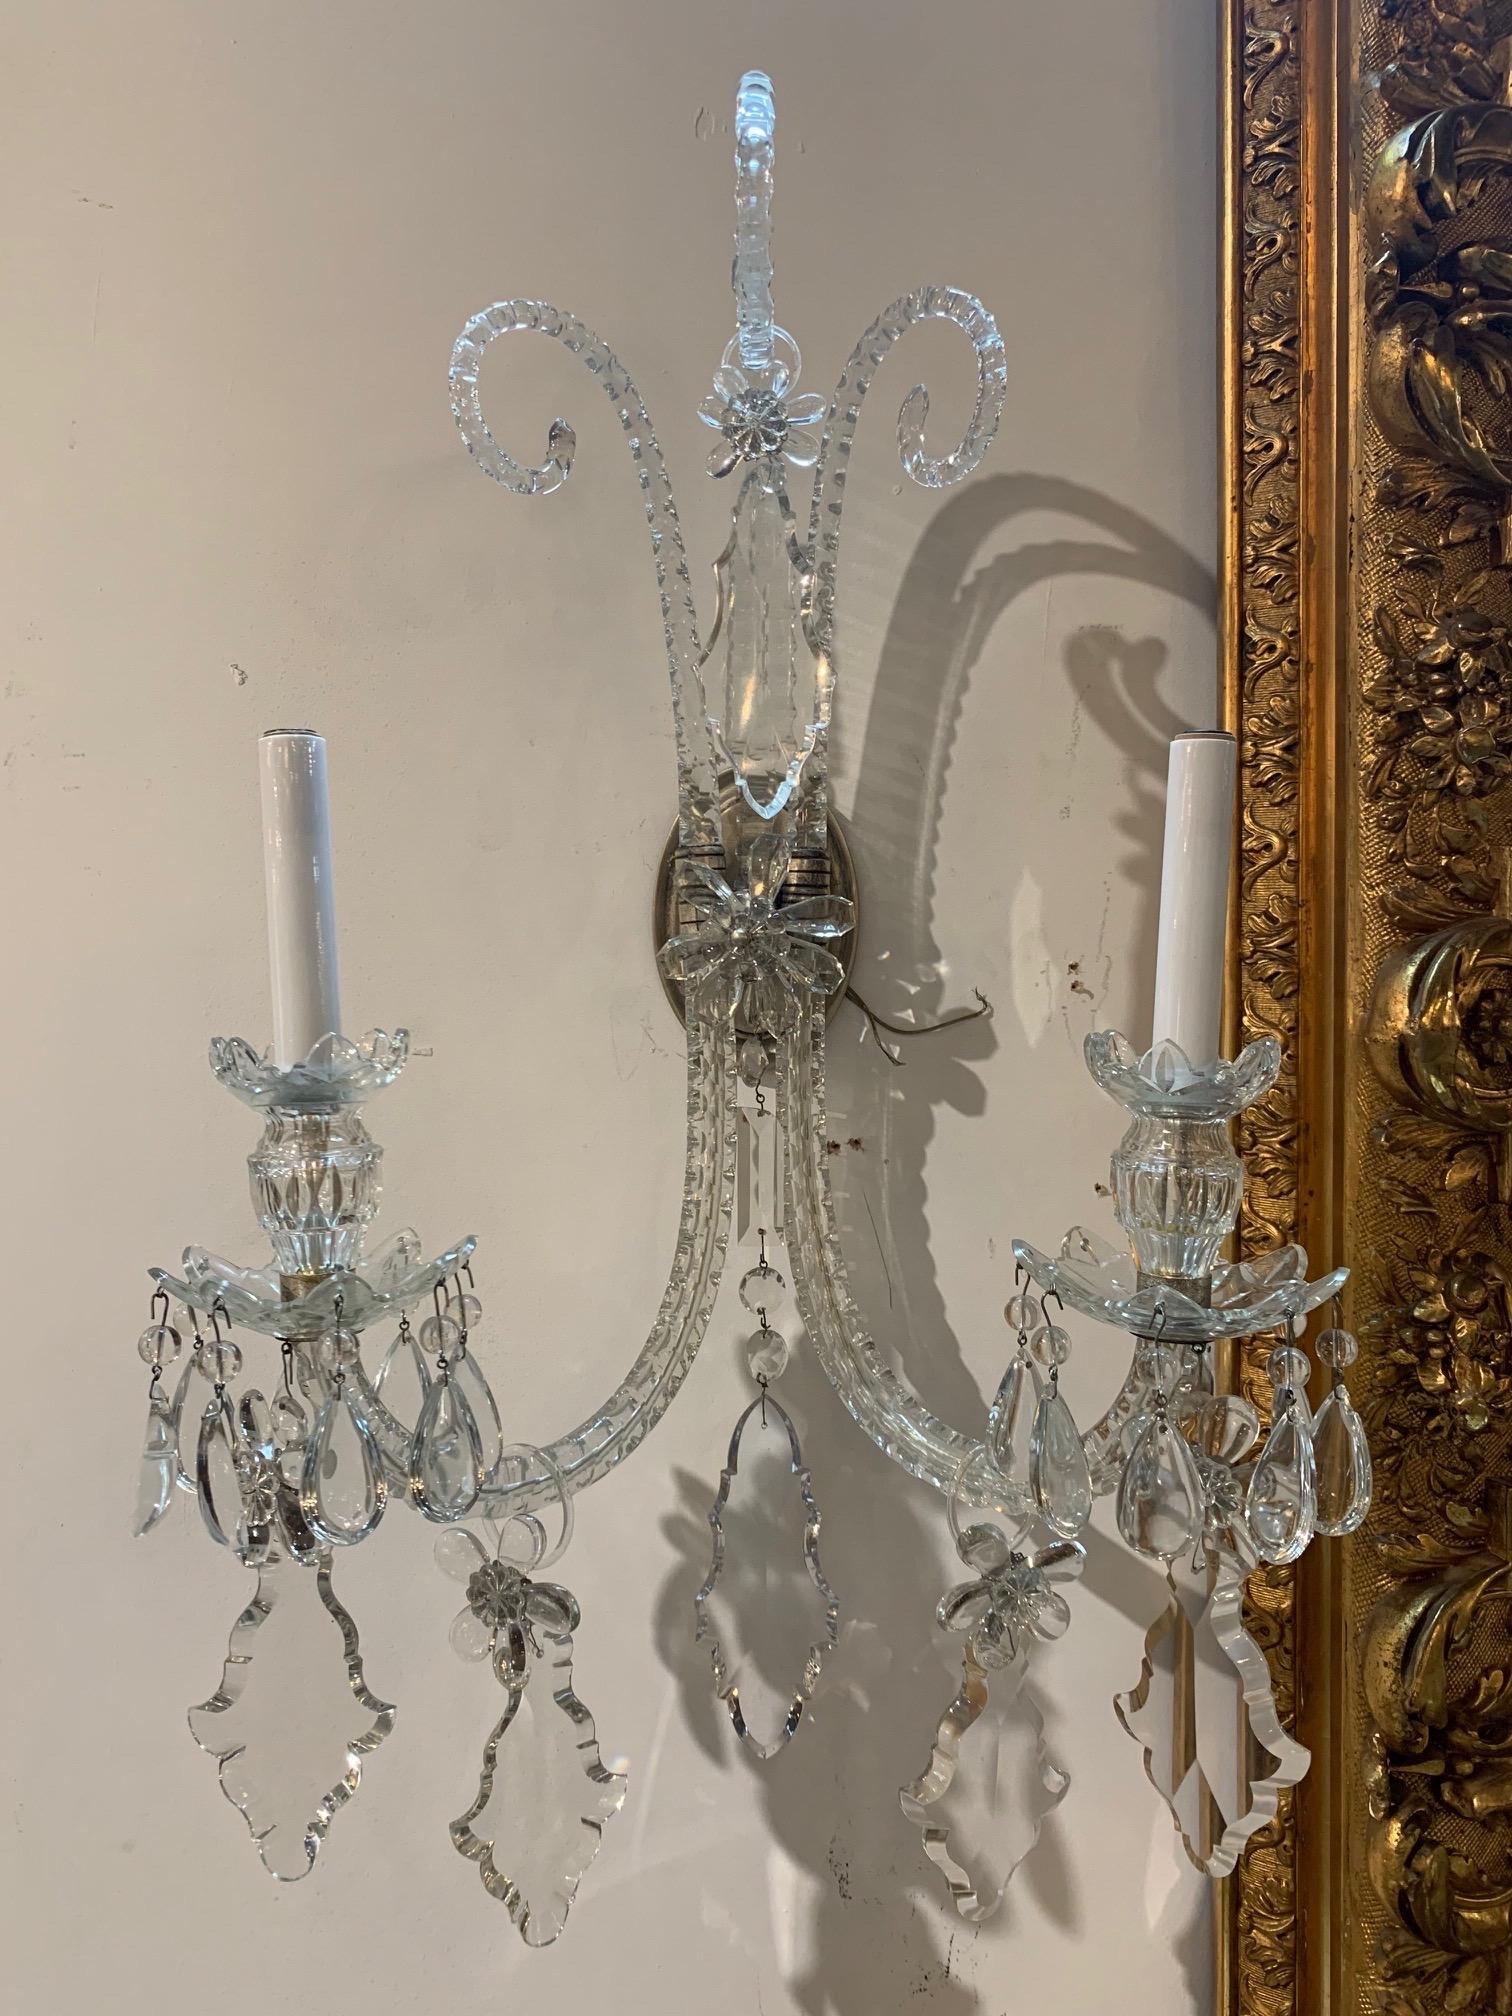 Lovely pair of antique English Waterford style crystal wall sconces with 2 lights. Large dangling crystals and nice scale and shape on these. So pretty!!